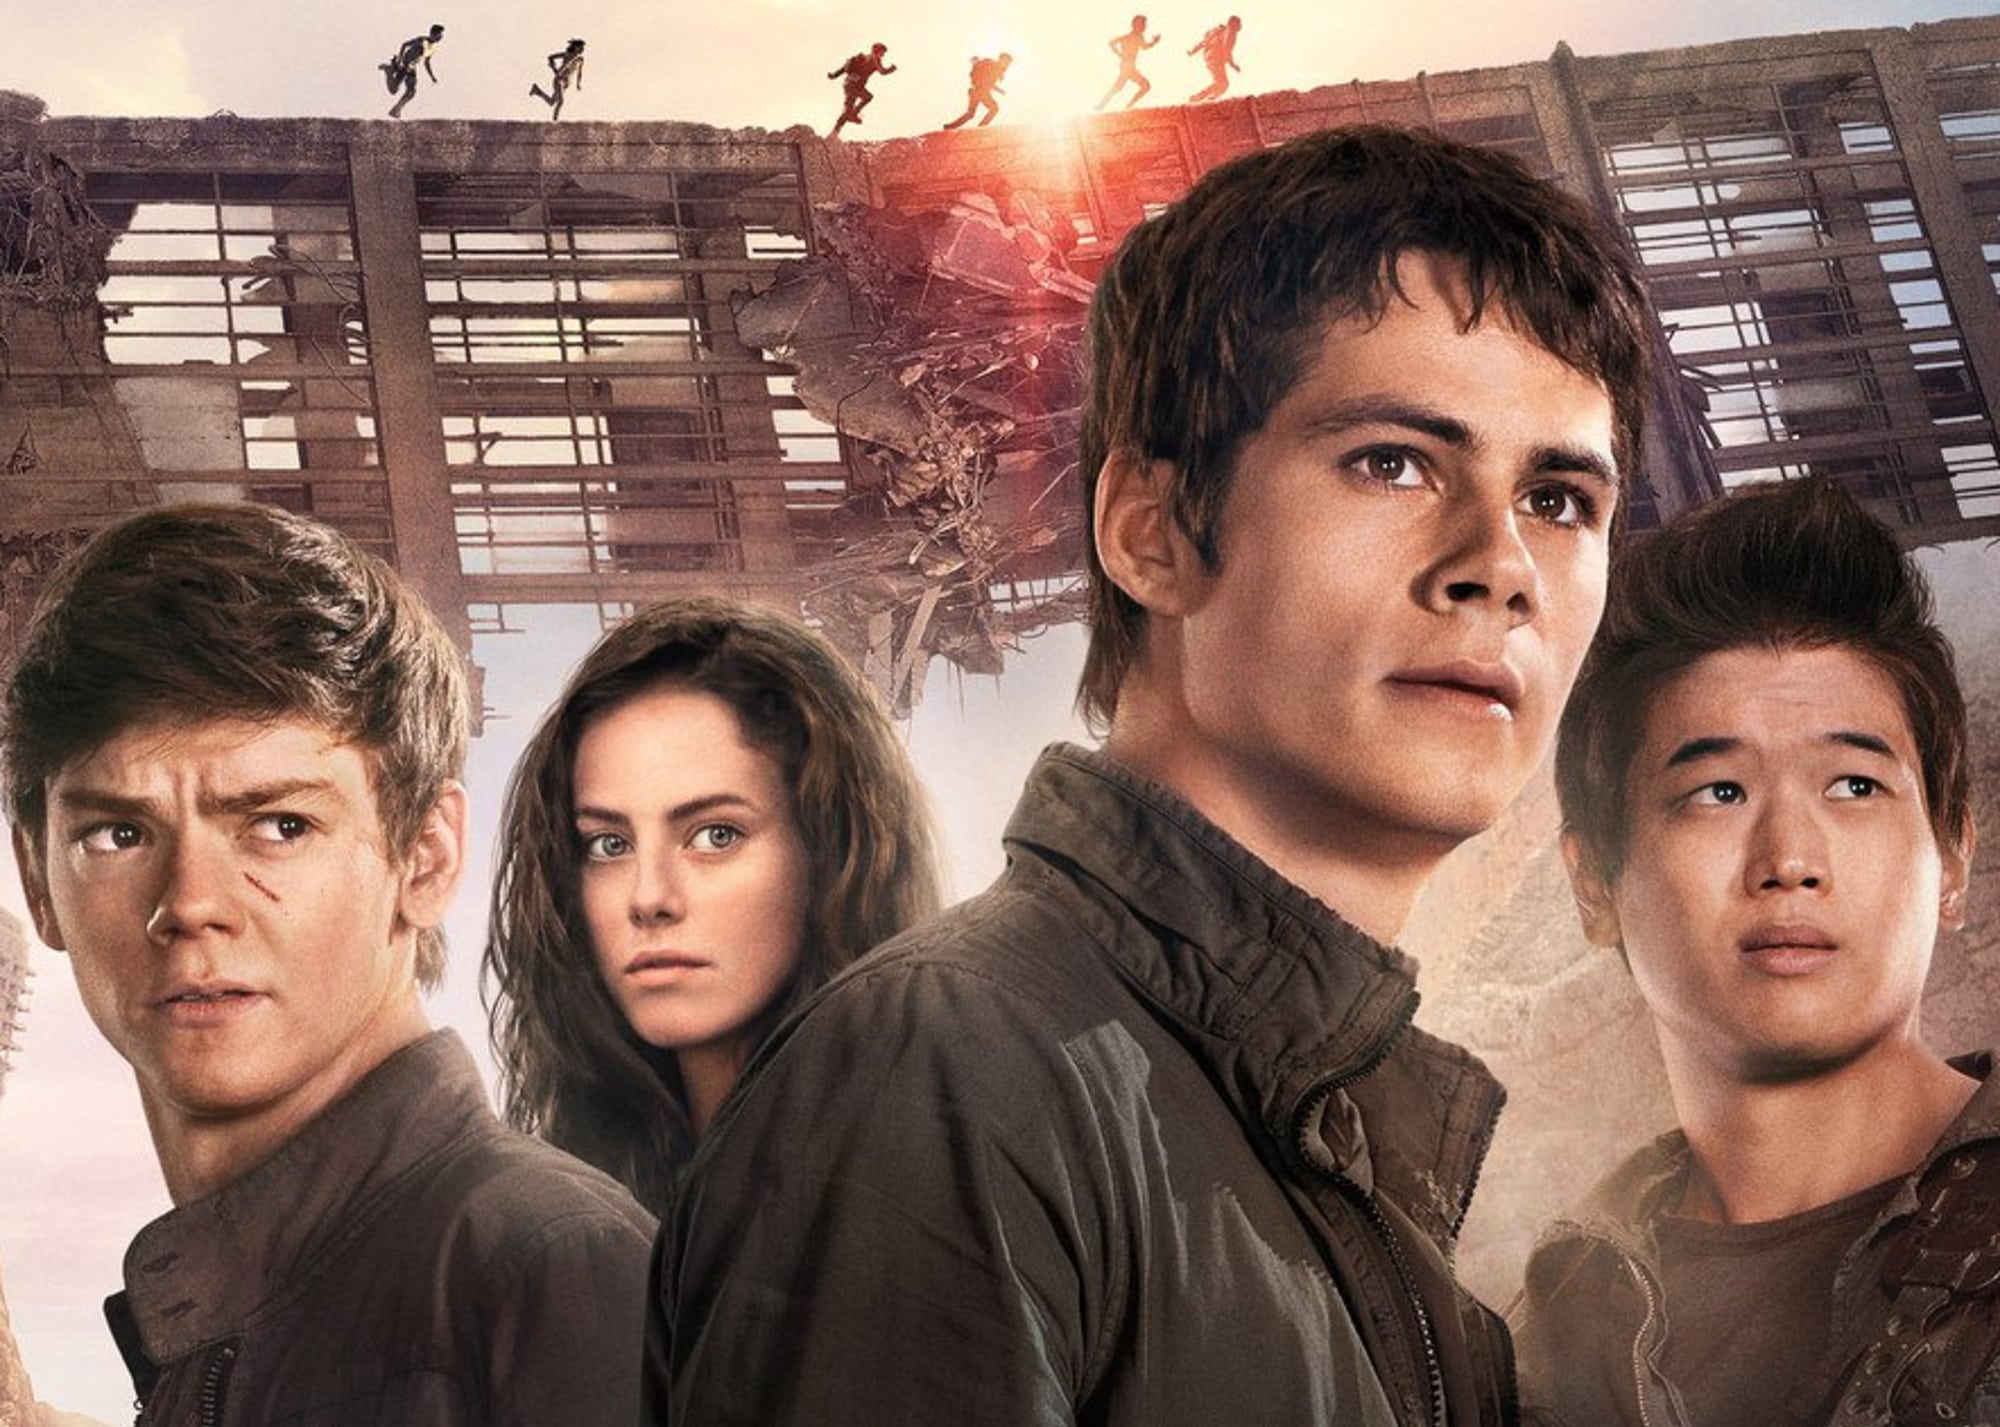 The Maze Runner: The Death Cure at an AMC Theatre near you.